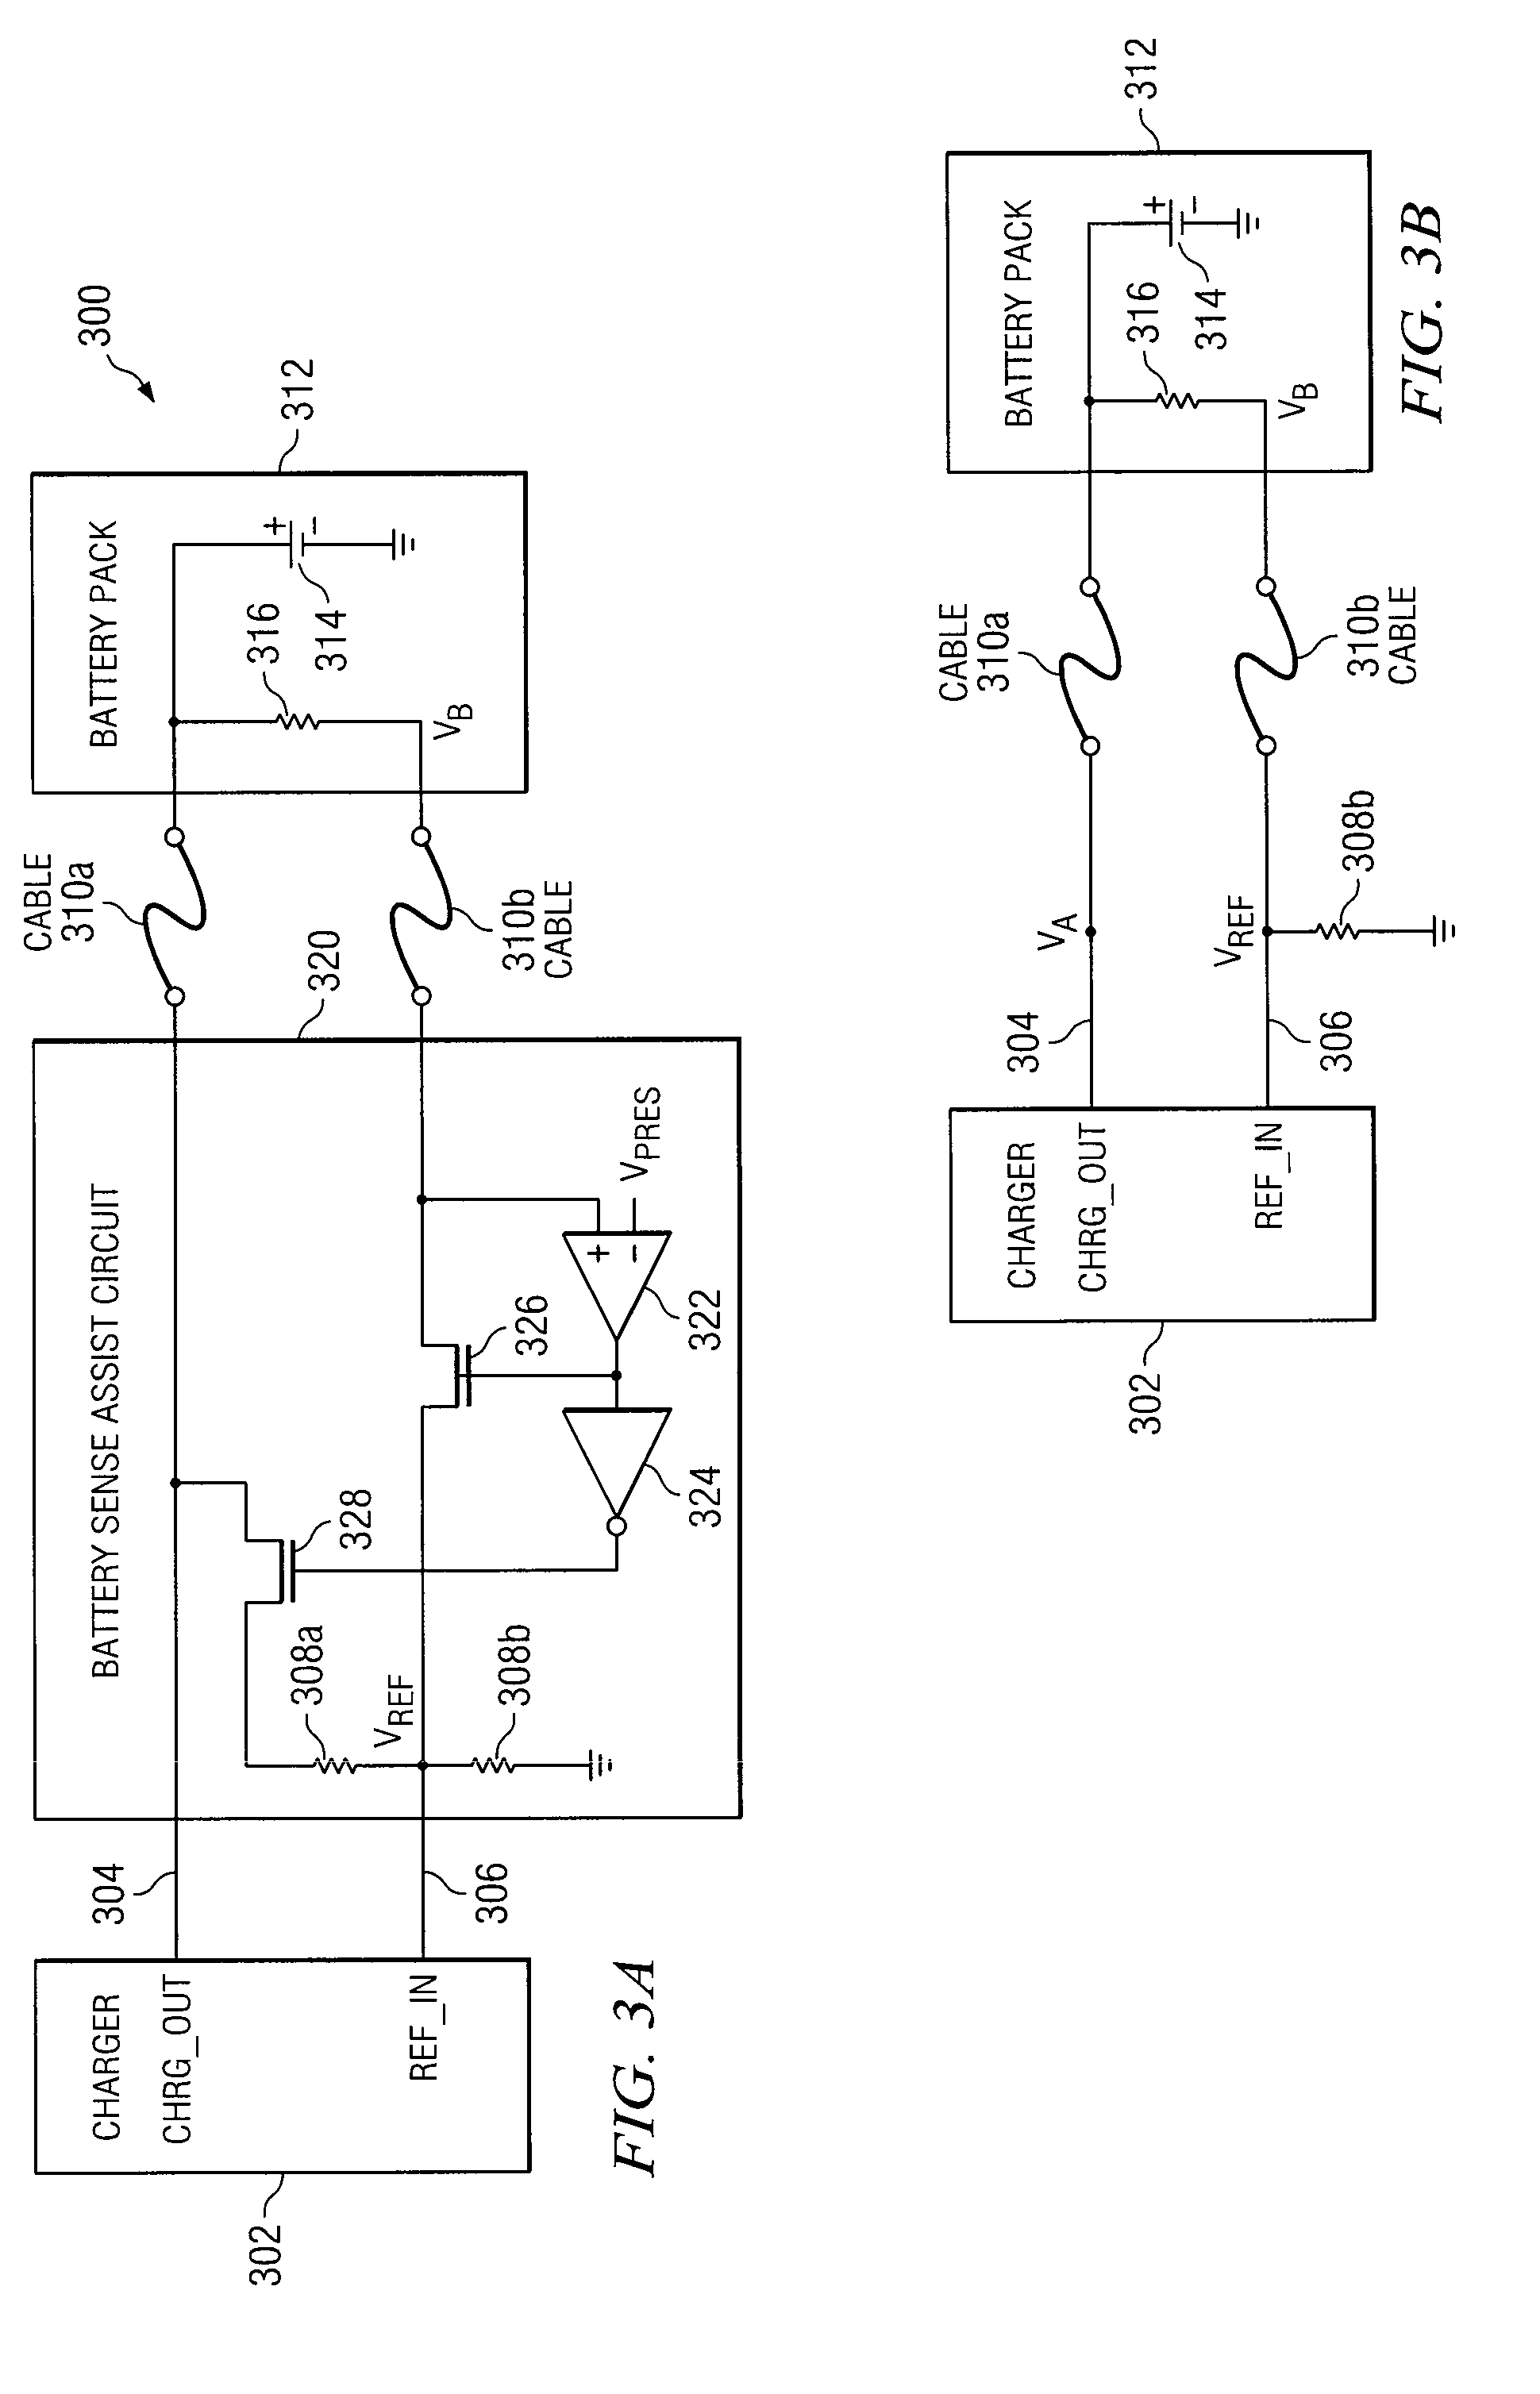 System and method for remote battery sensing